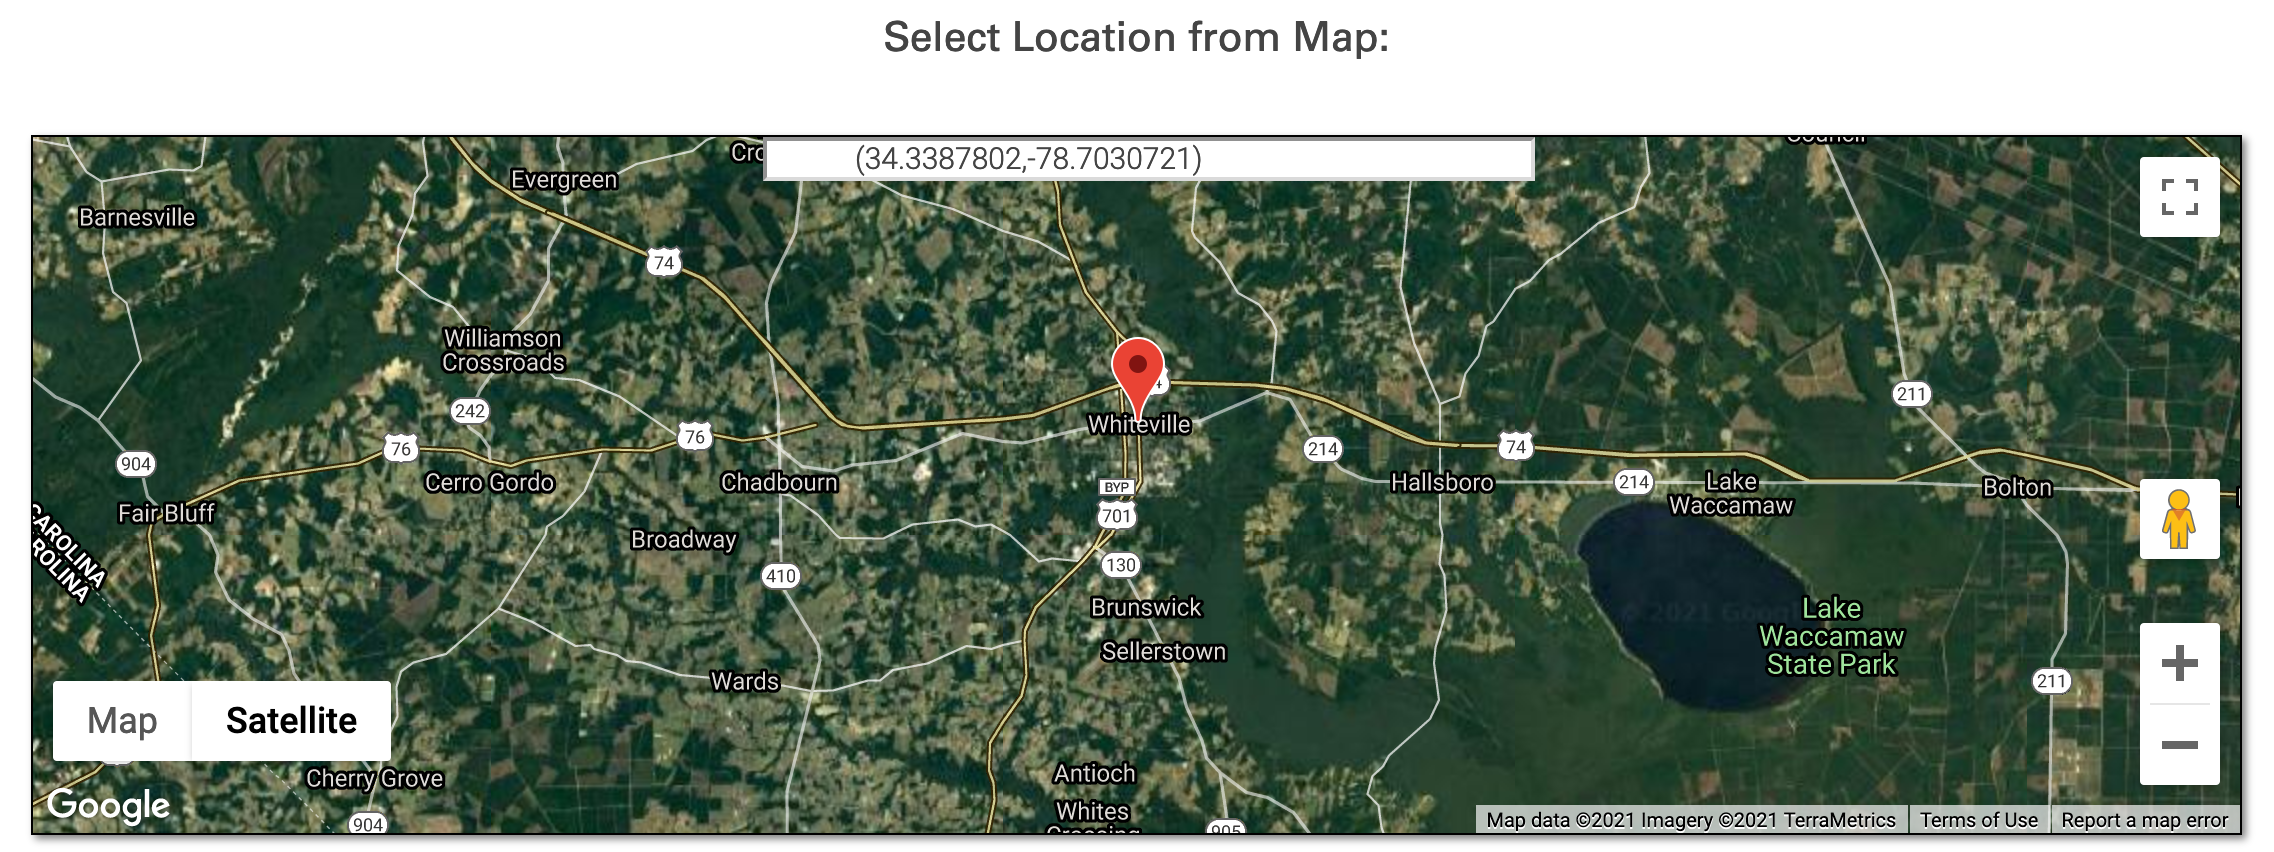 Map for users to select location on click